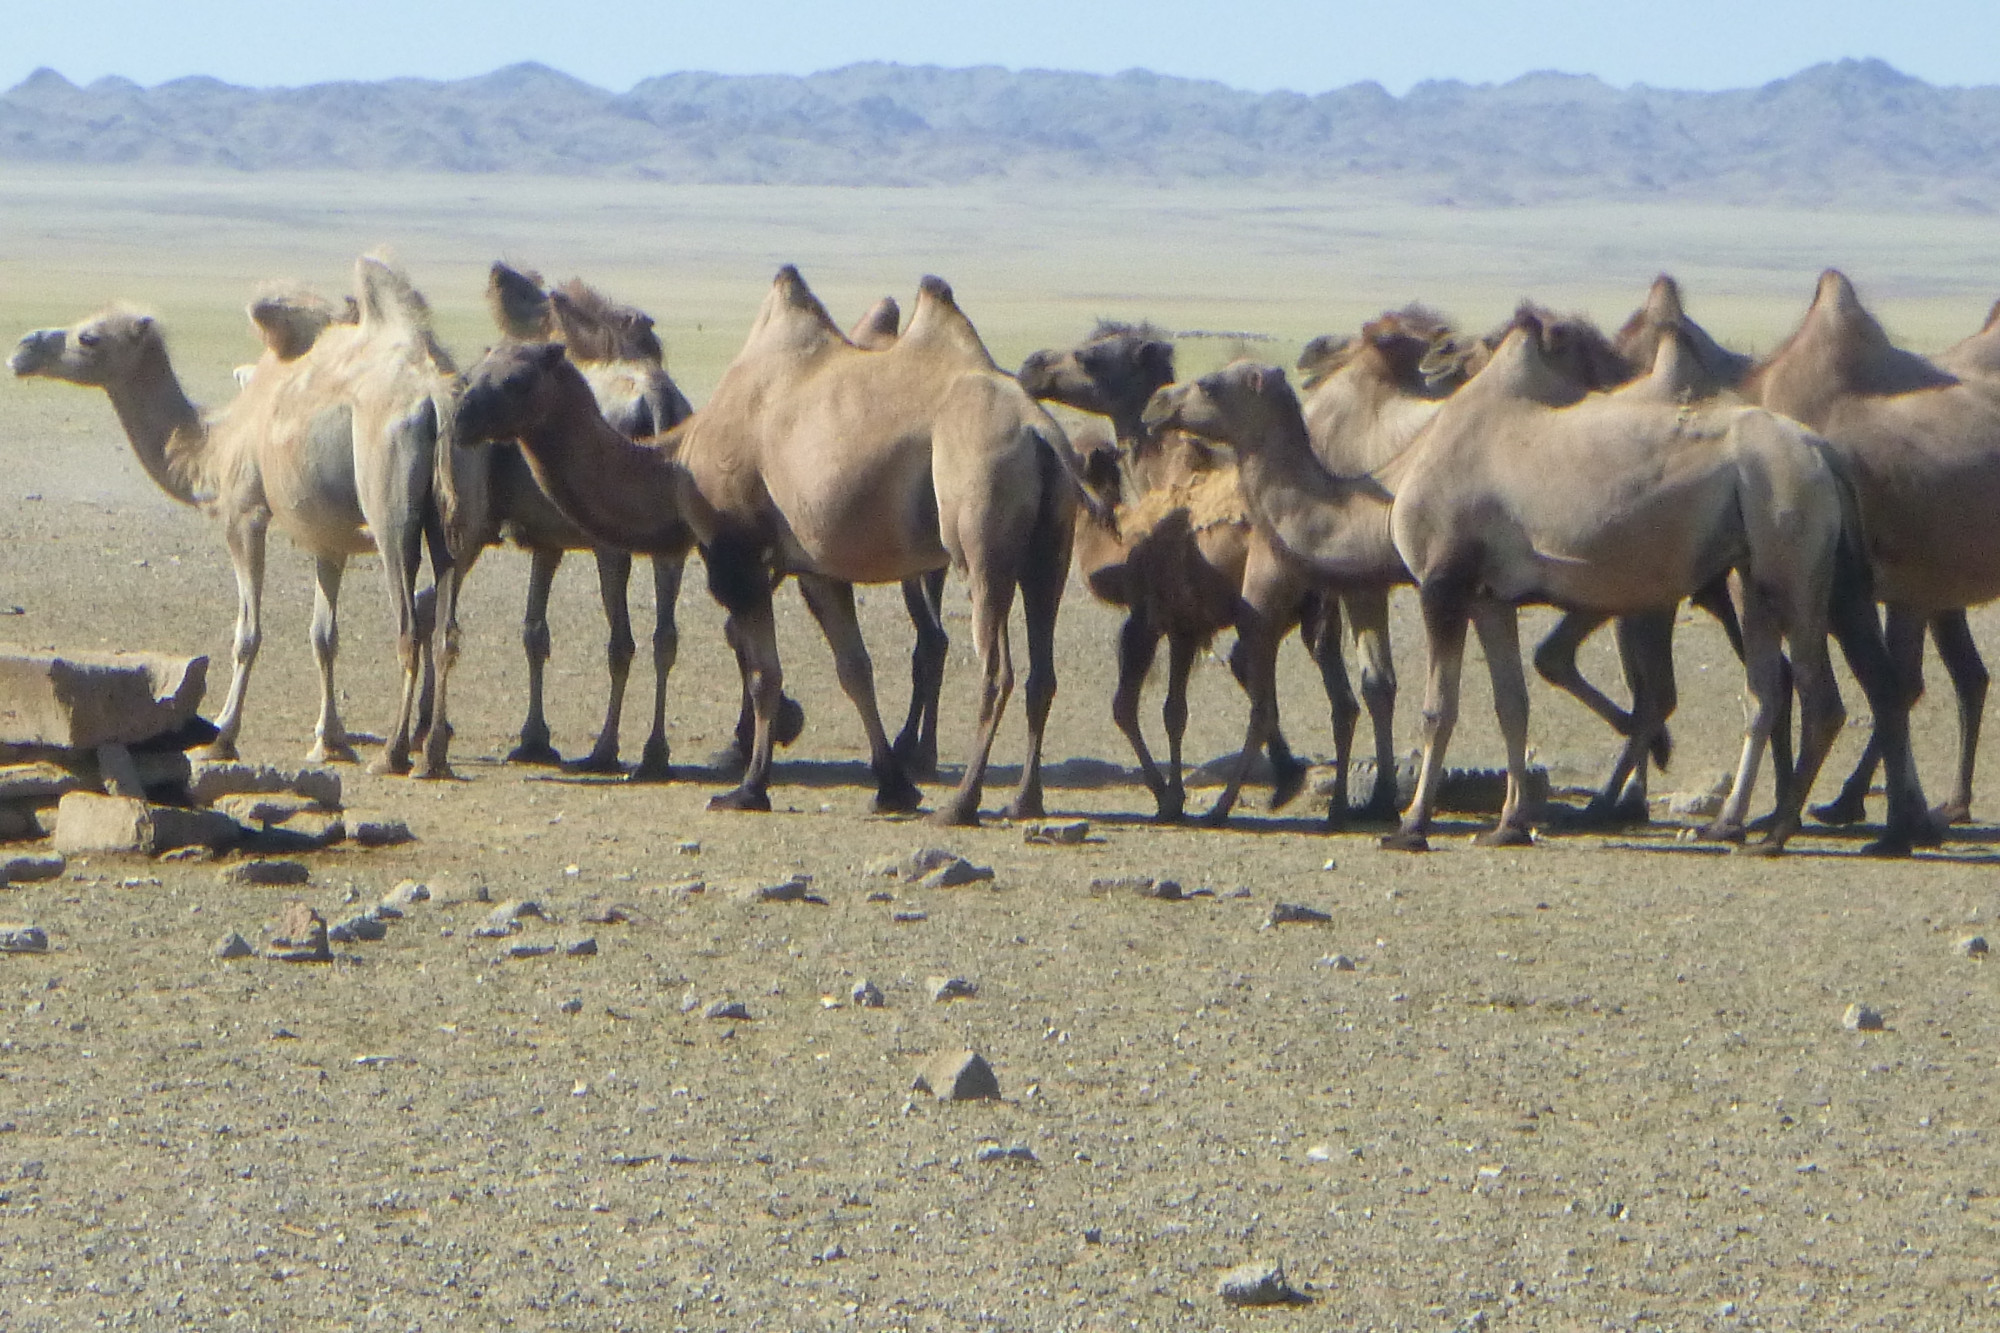 Herds of camels as well